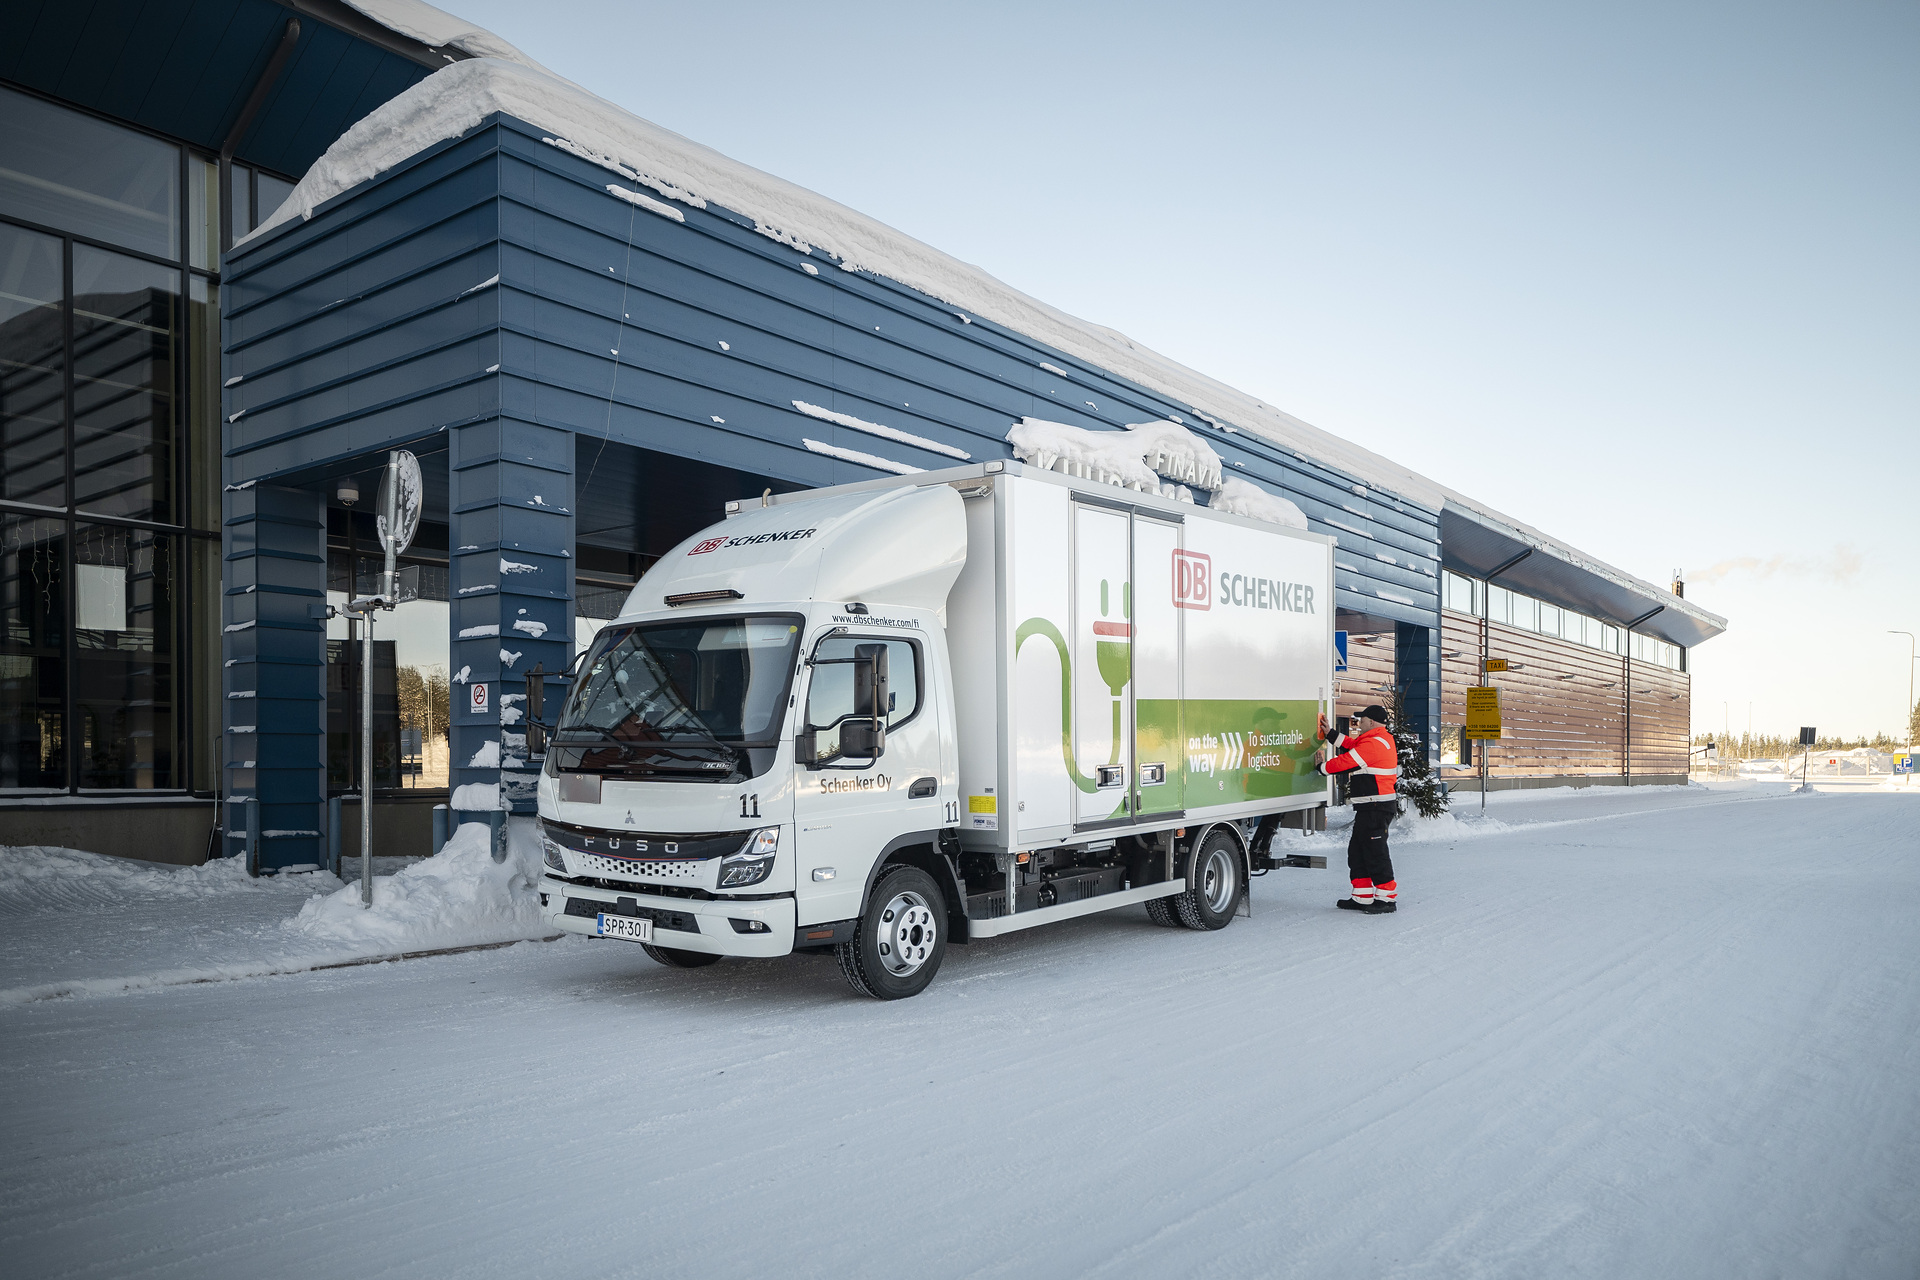 Keeps cool in Northern Finland: FUSO eCanter operates as one of Daimler Truck’s most northern electric trucks in customer operation at DB SCHENKER